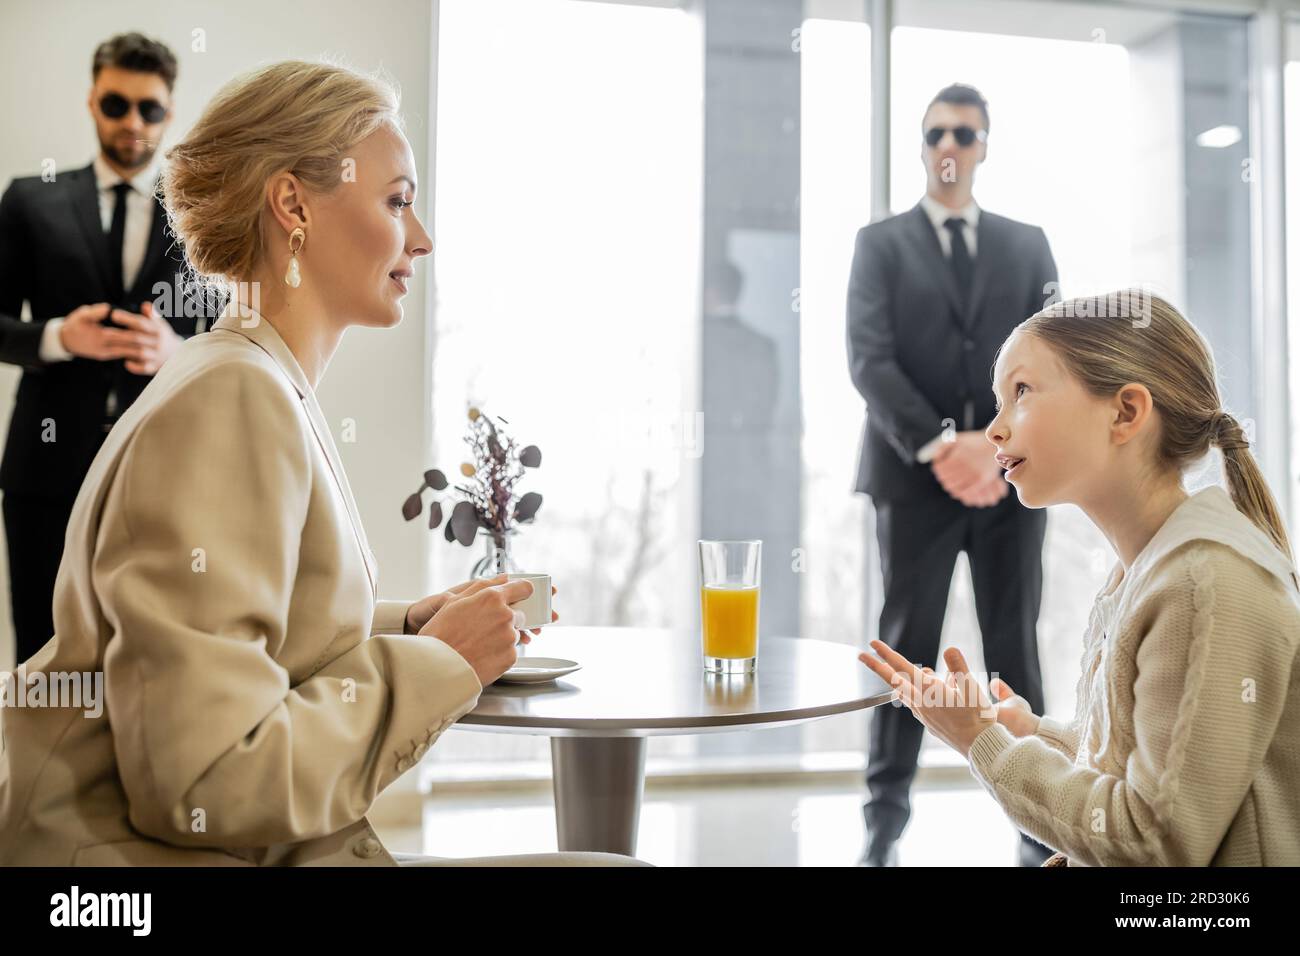 security service, private safety concept, preteen girl talking with blonde mother over drinks in cafe, bodyguards standing on blurred background, pers Stock Photo